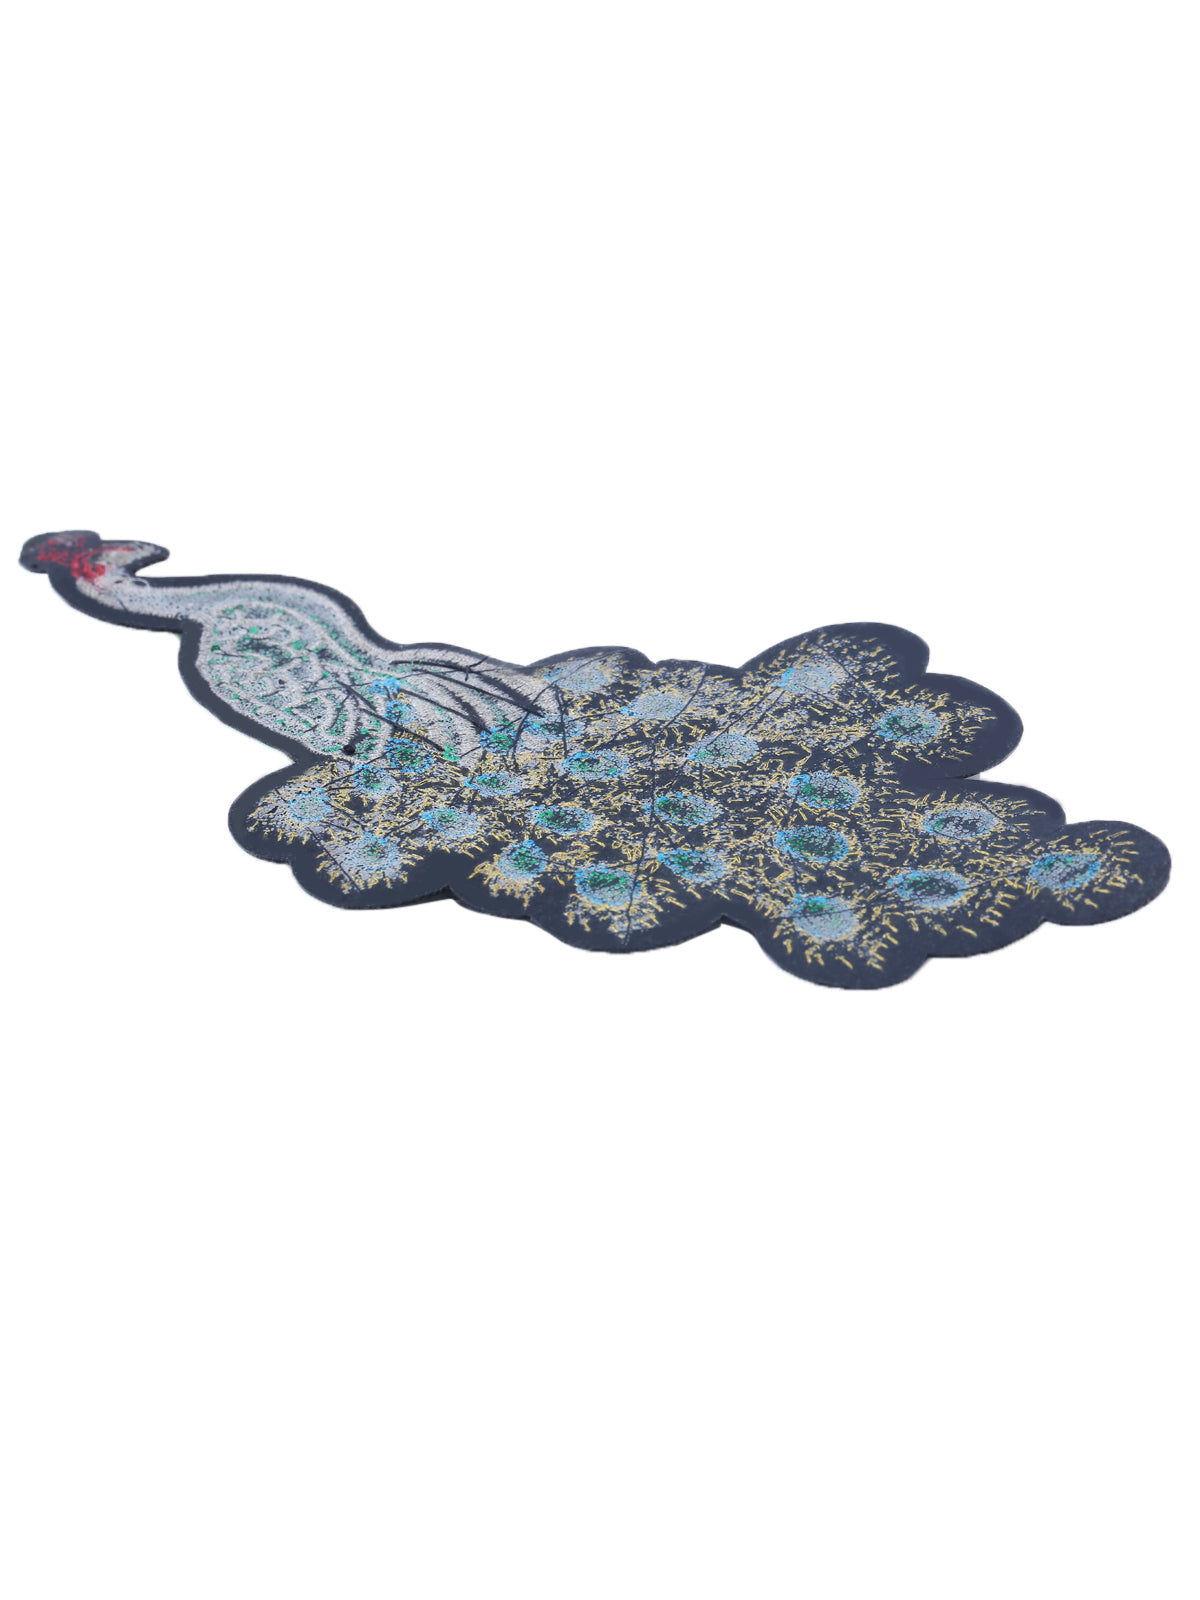 Gorgeous Embroidered Sew On Beaded Peacock Bird Patch